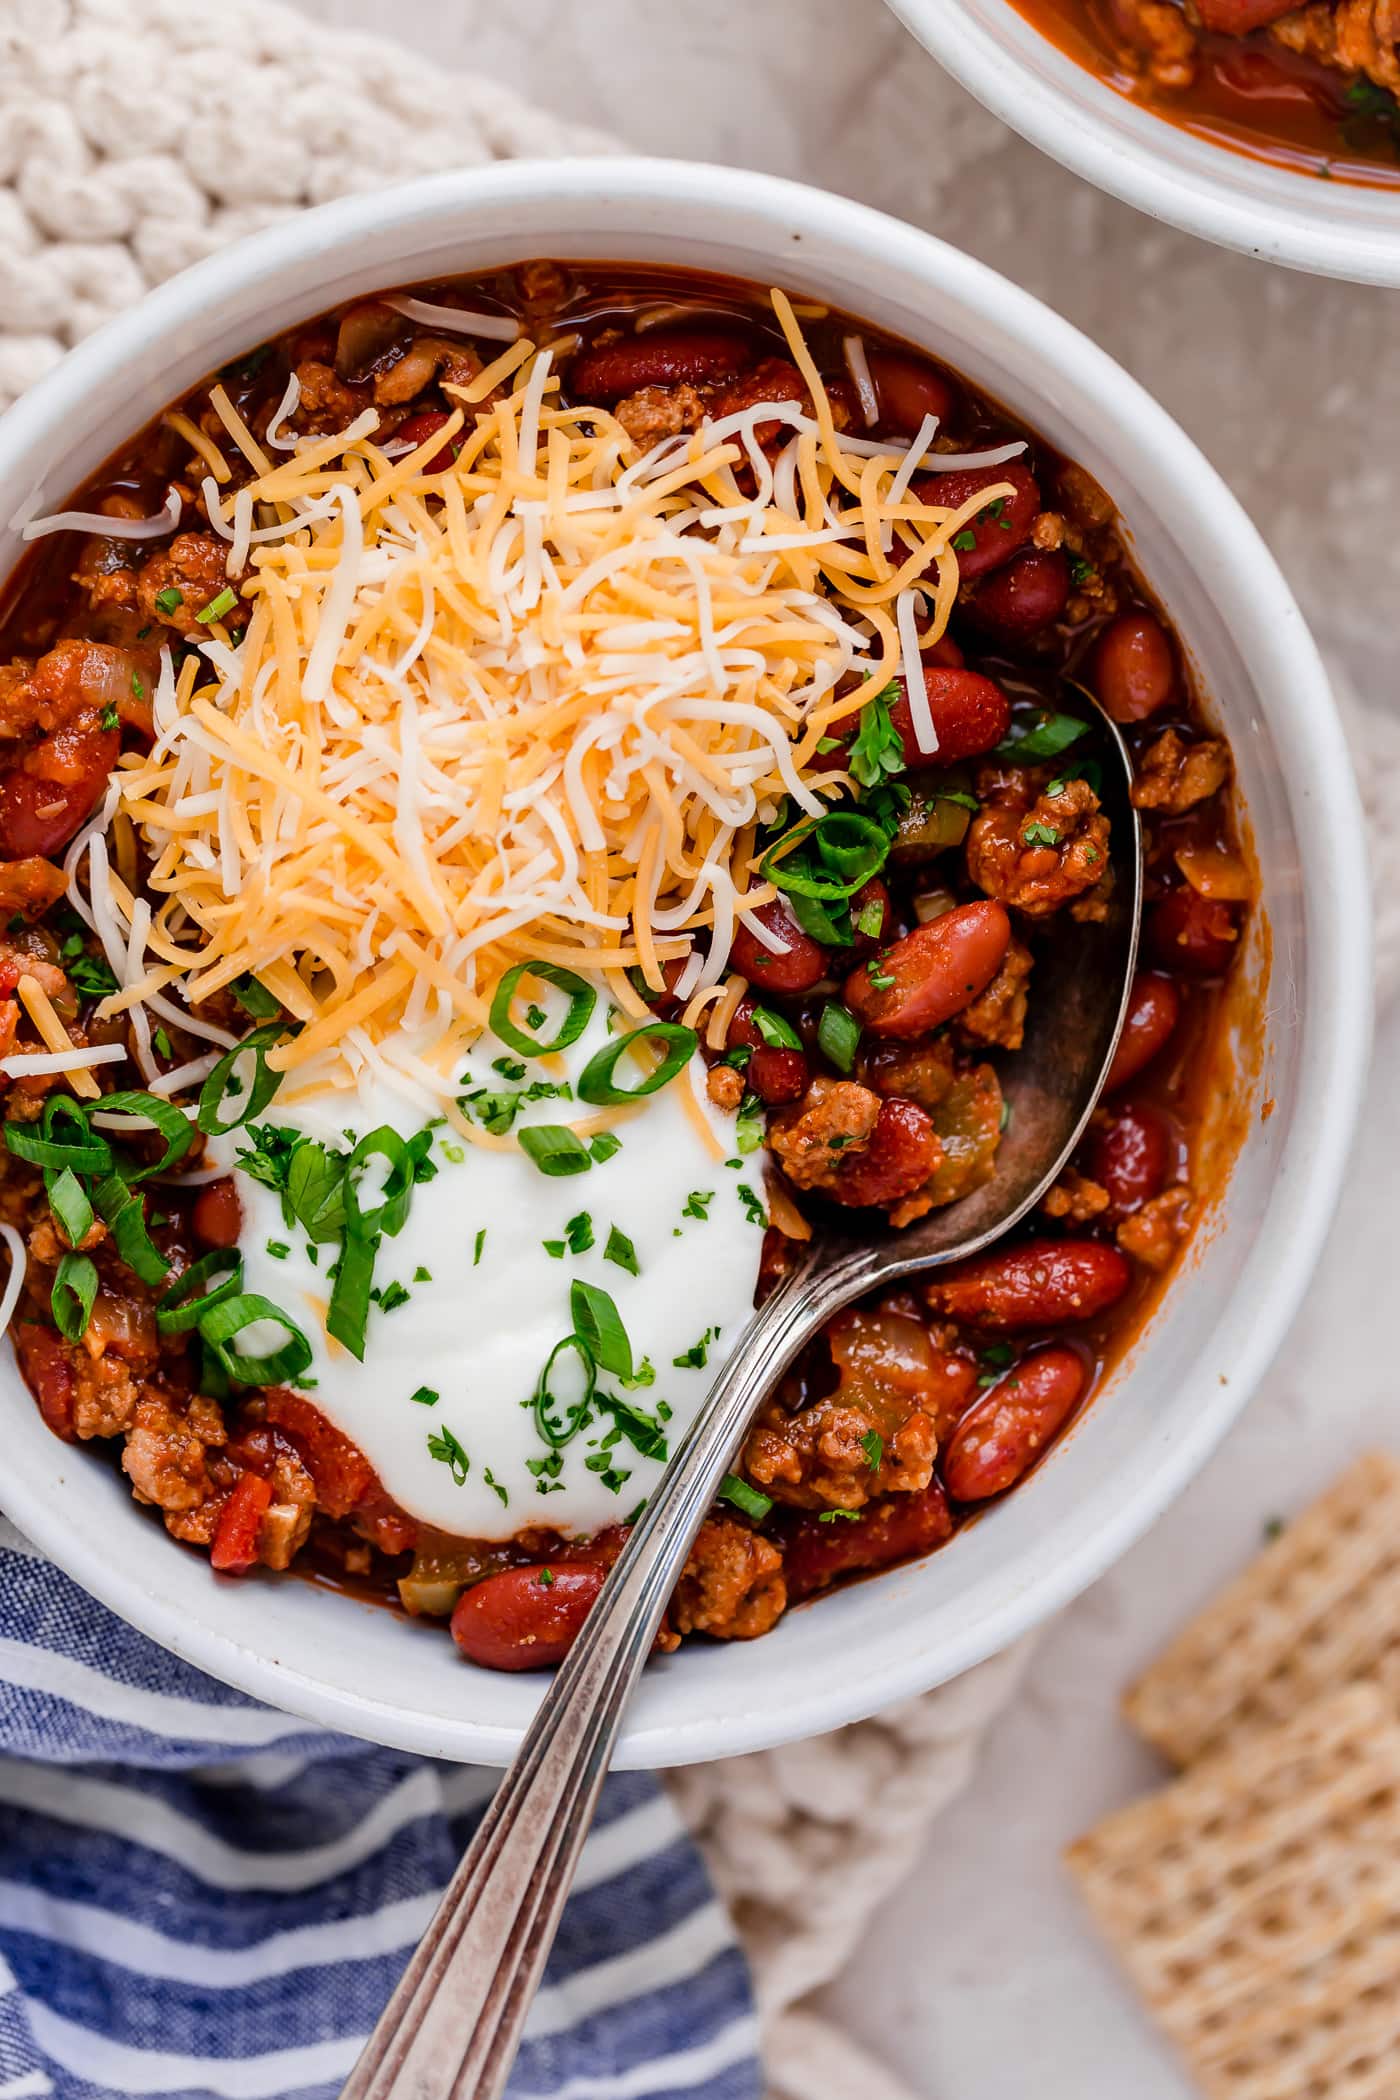 Best Turkey Chili Recipe Family Friendly - Cooking Classy.